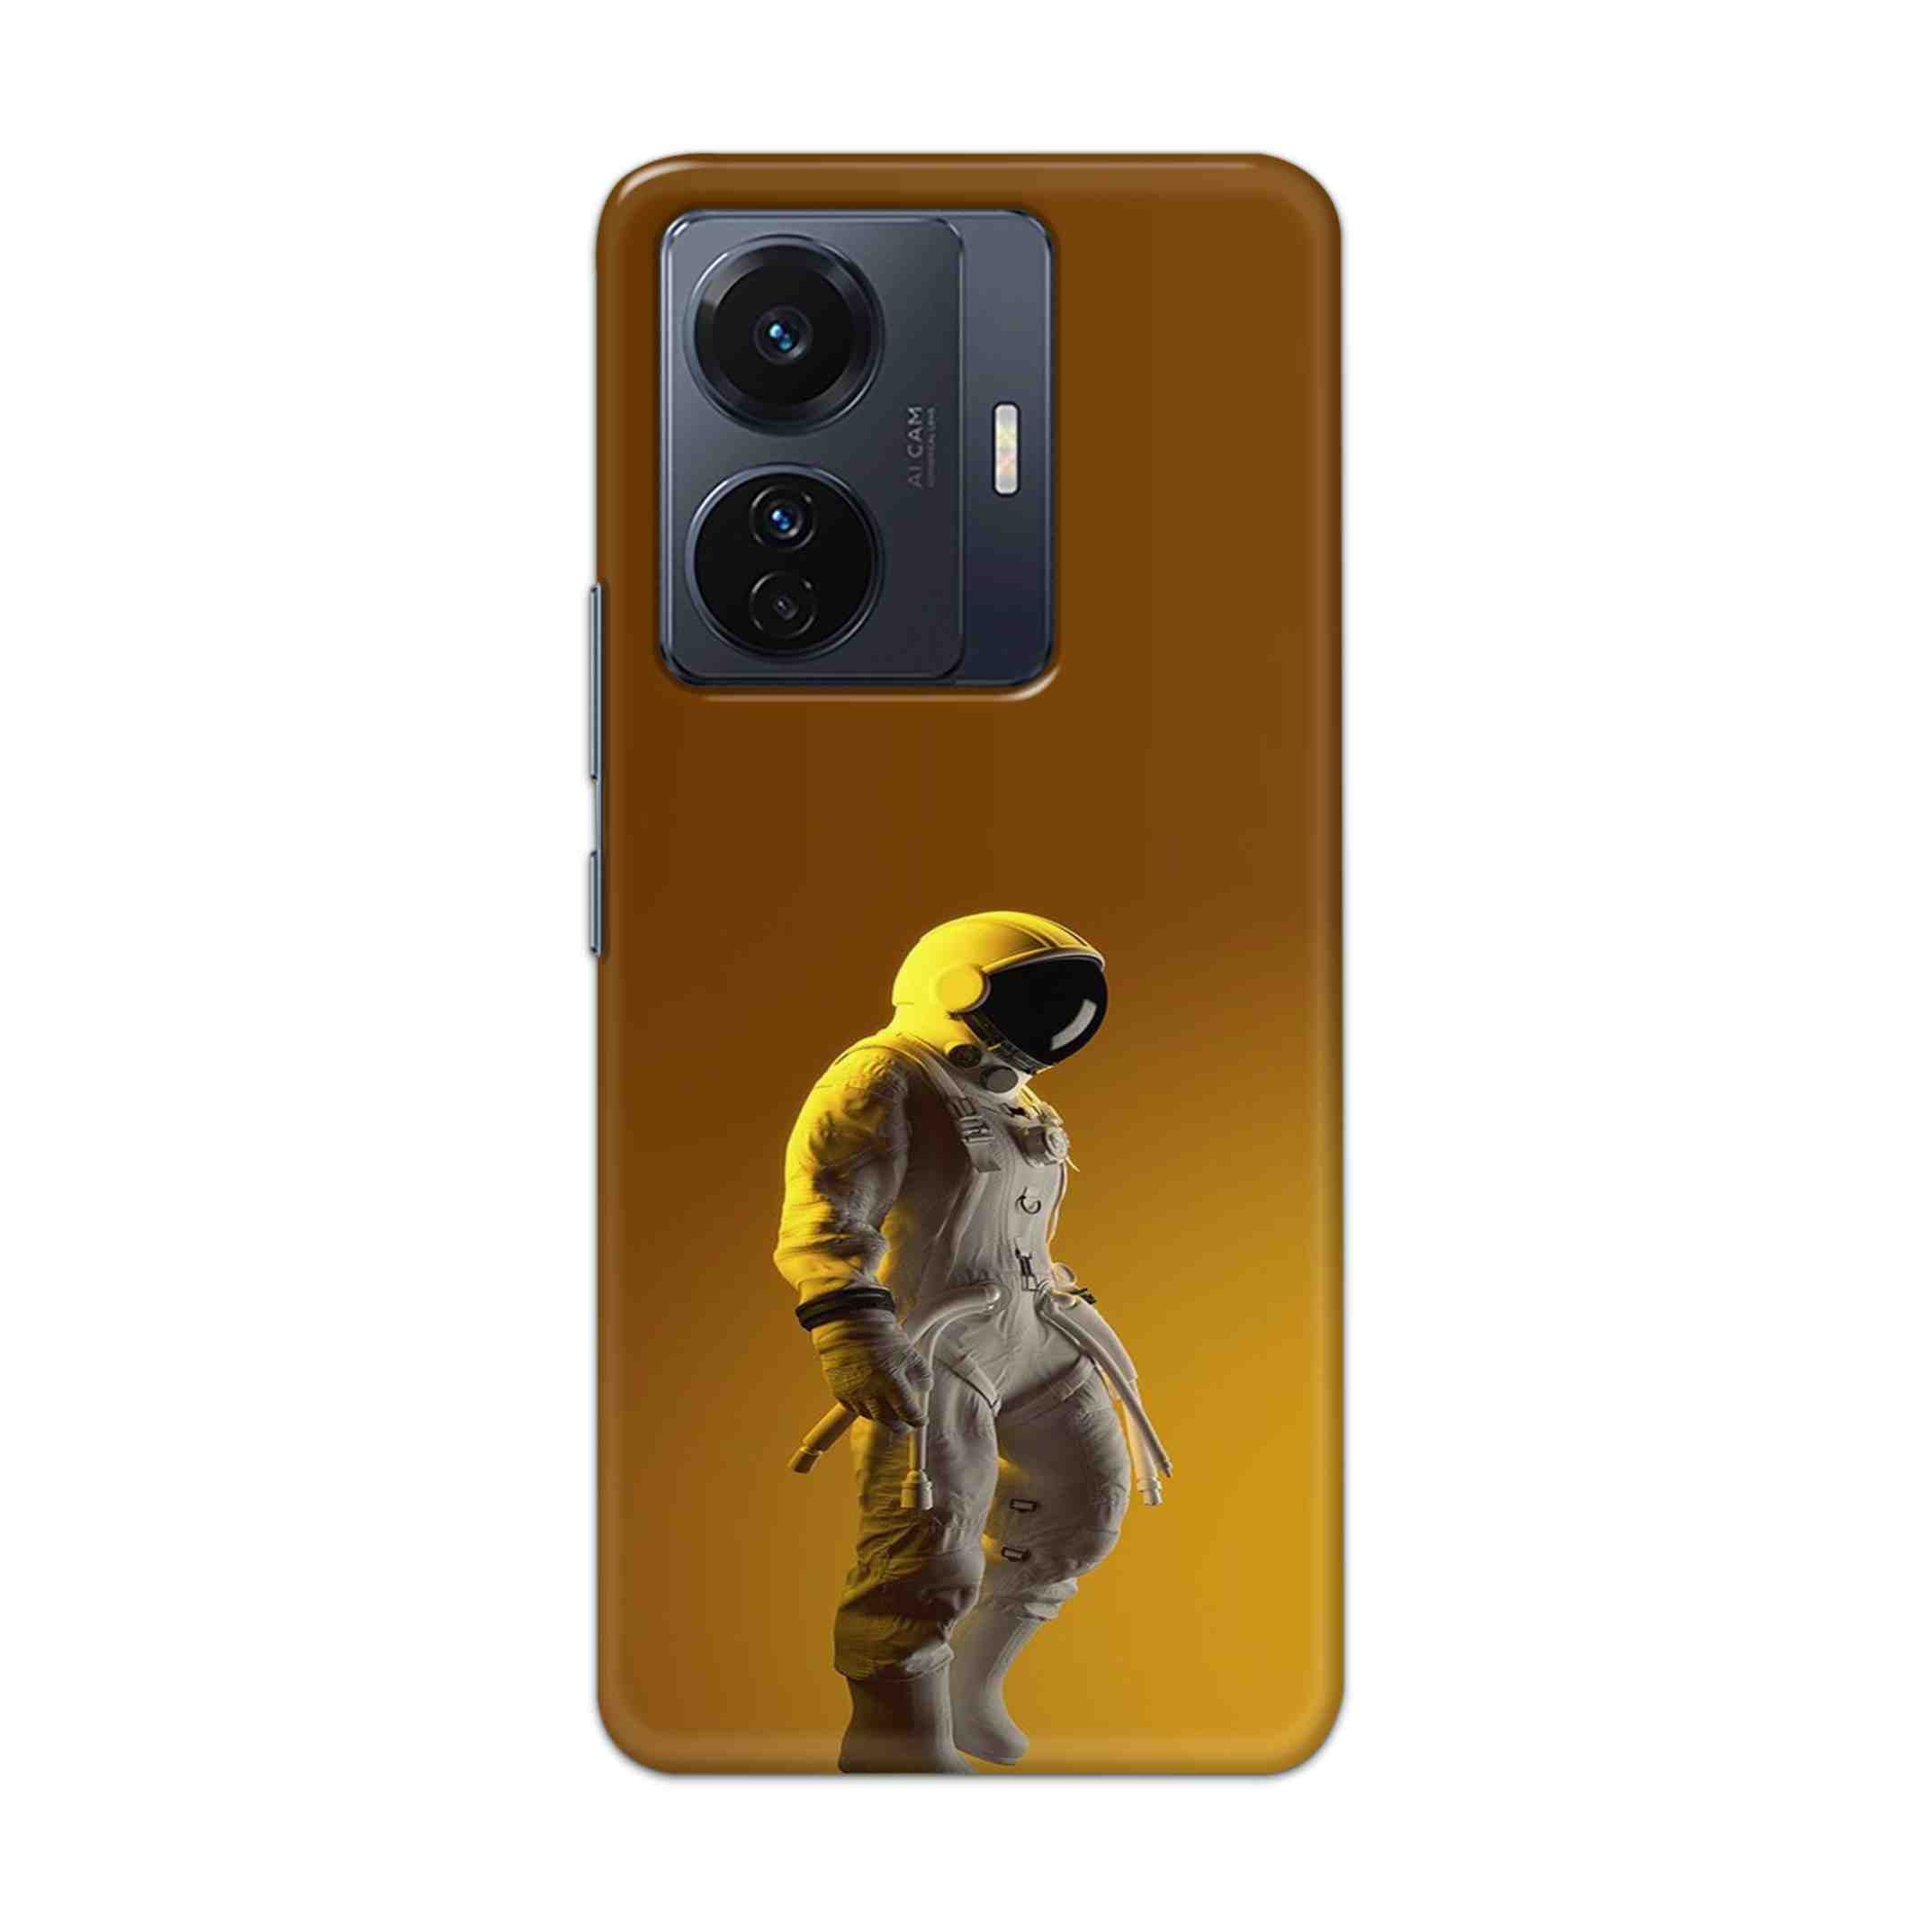 Buy Yellow Astronaut Hard Back Mobile Phone Case Cover For Vivo T1 Pro 5G Online